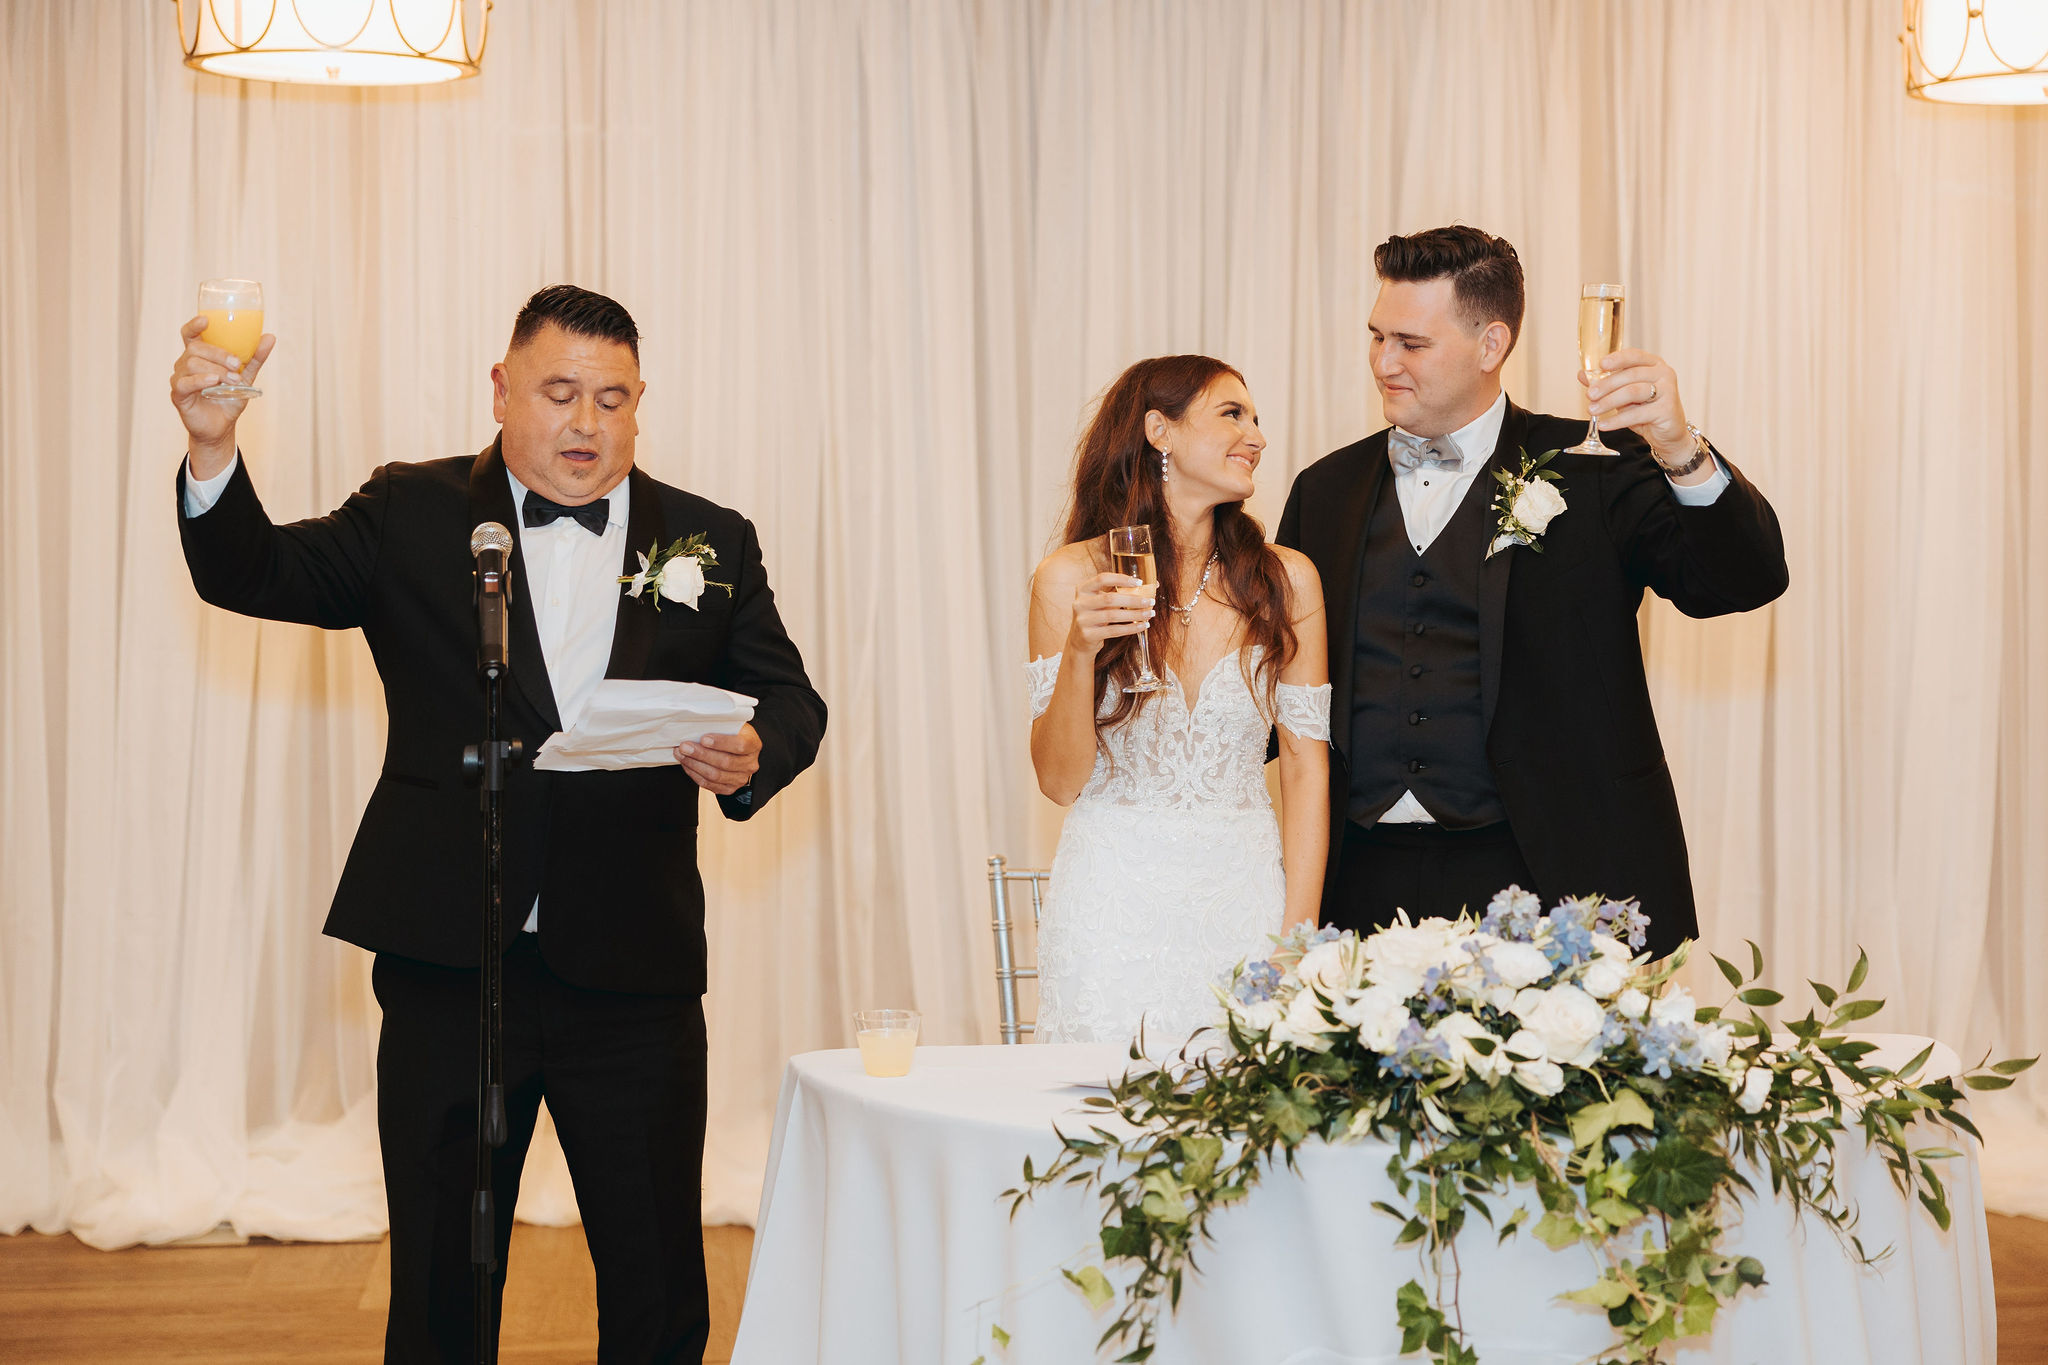 bride and groom toast at reception